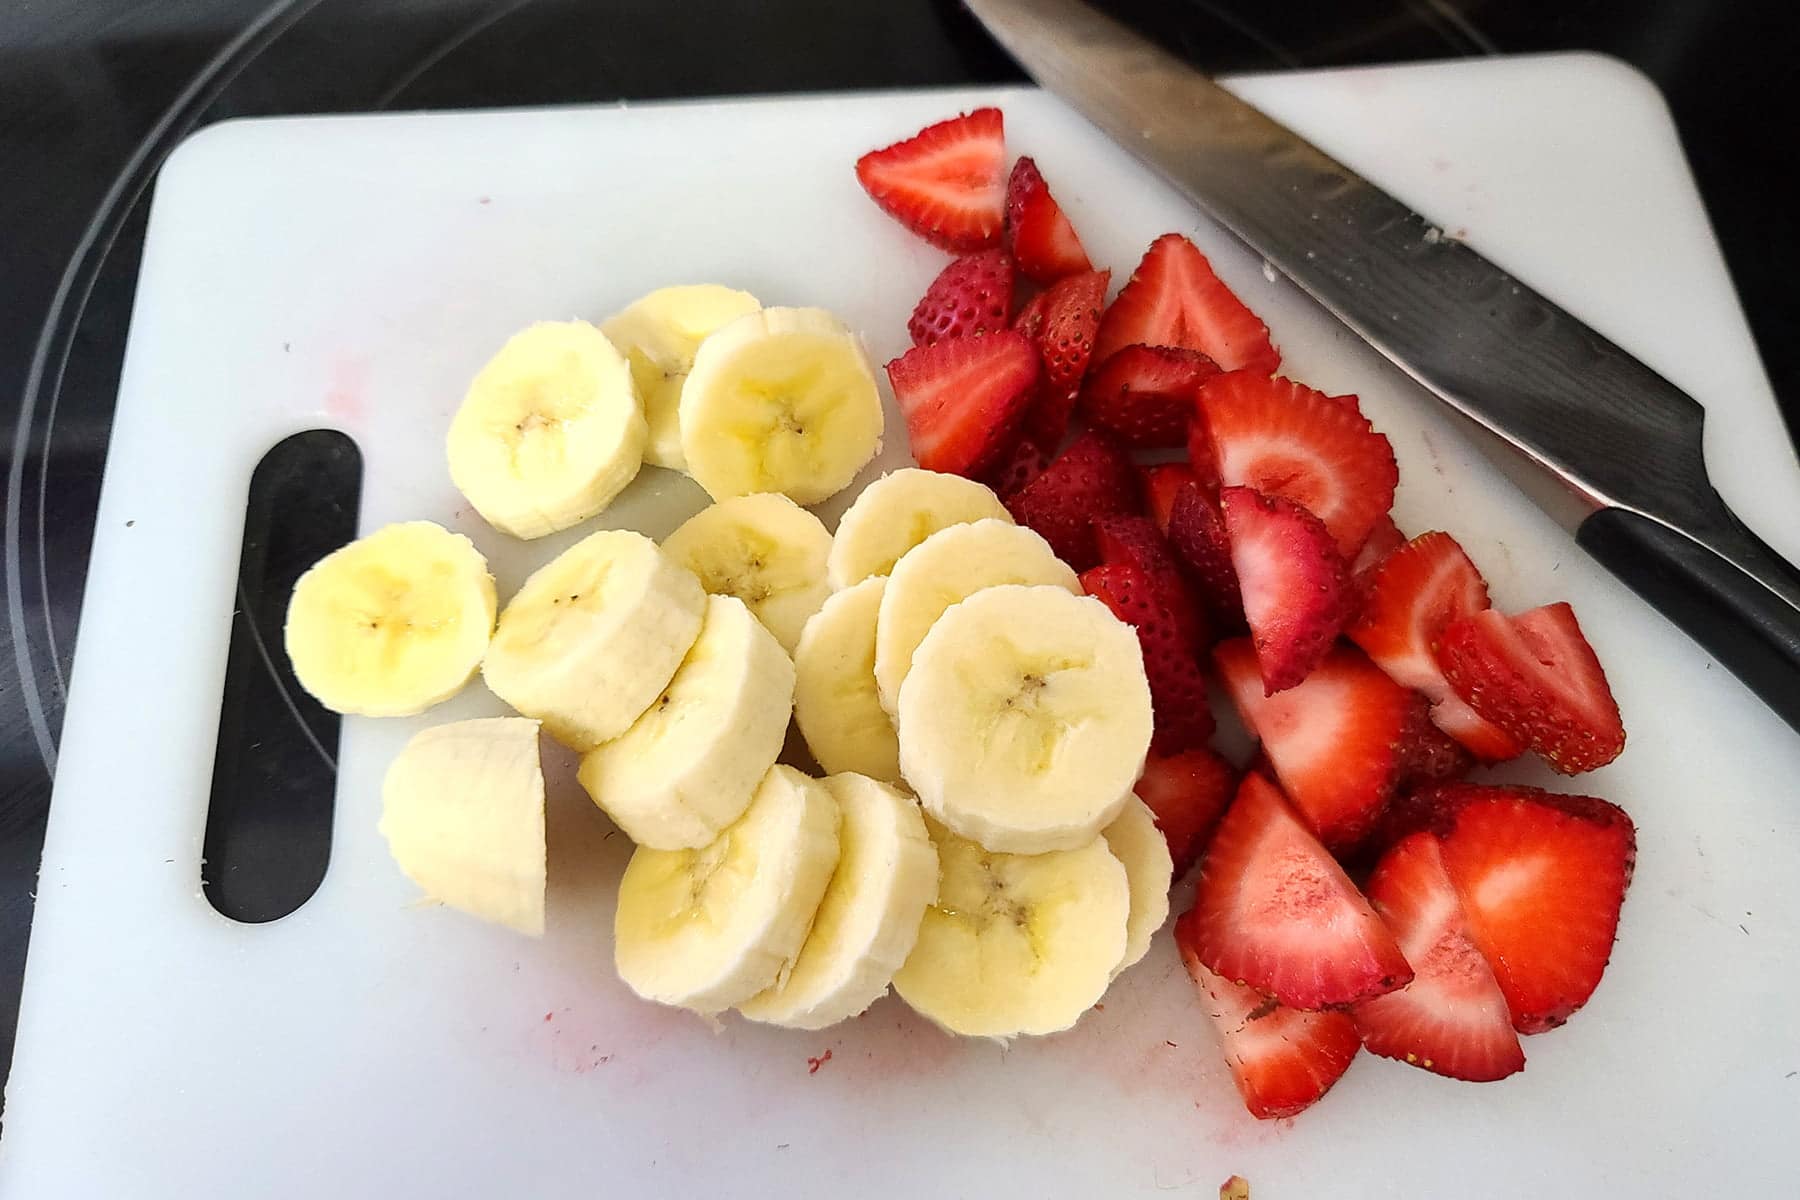 Sliced bananas and strawberries on a white cutting board.